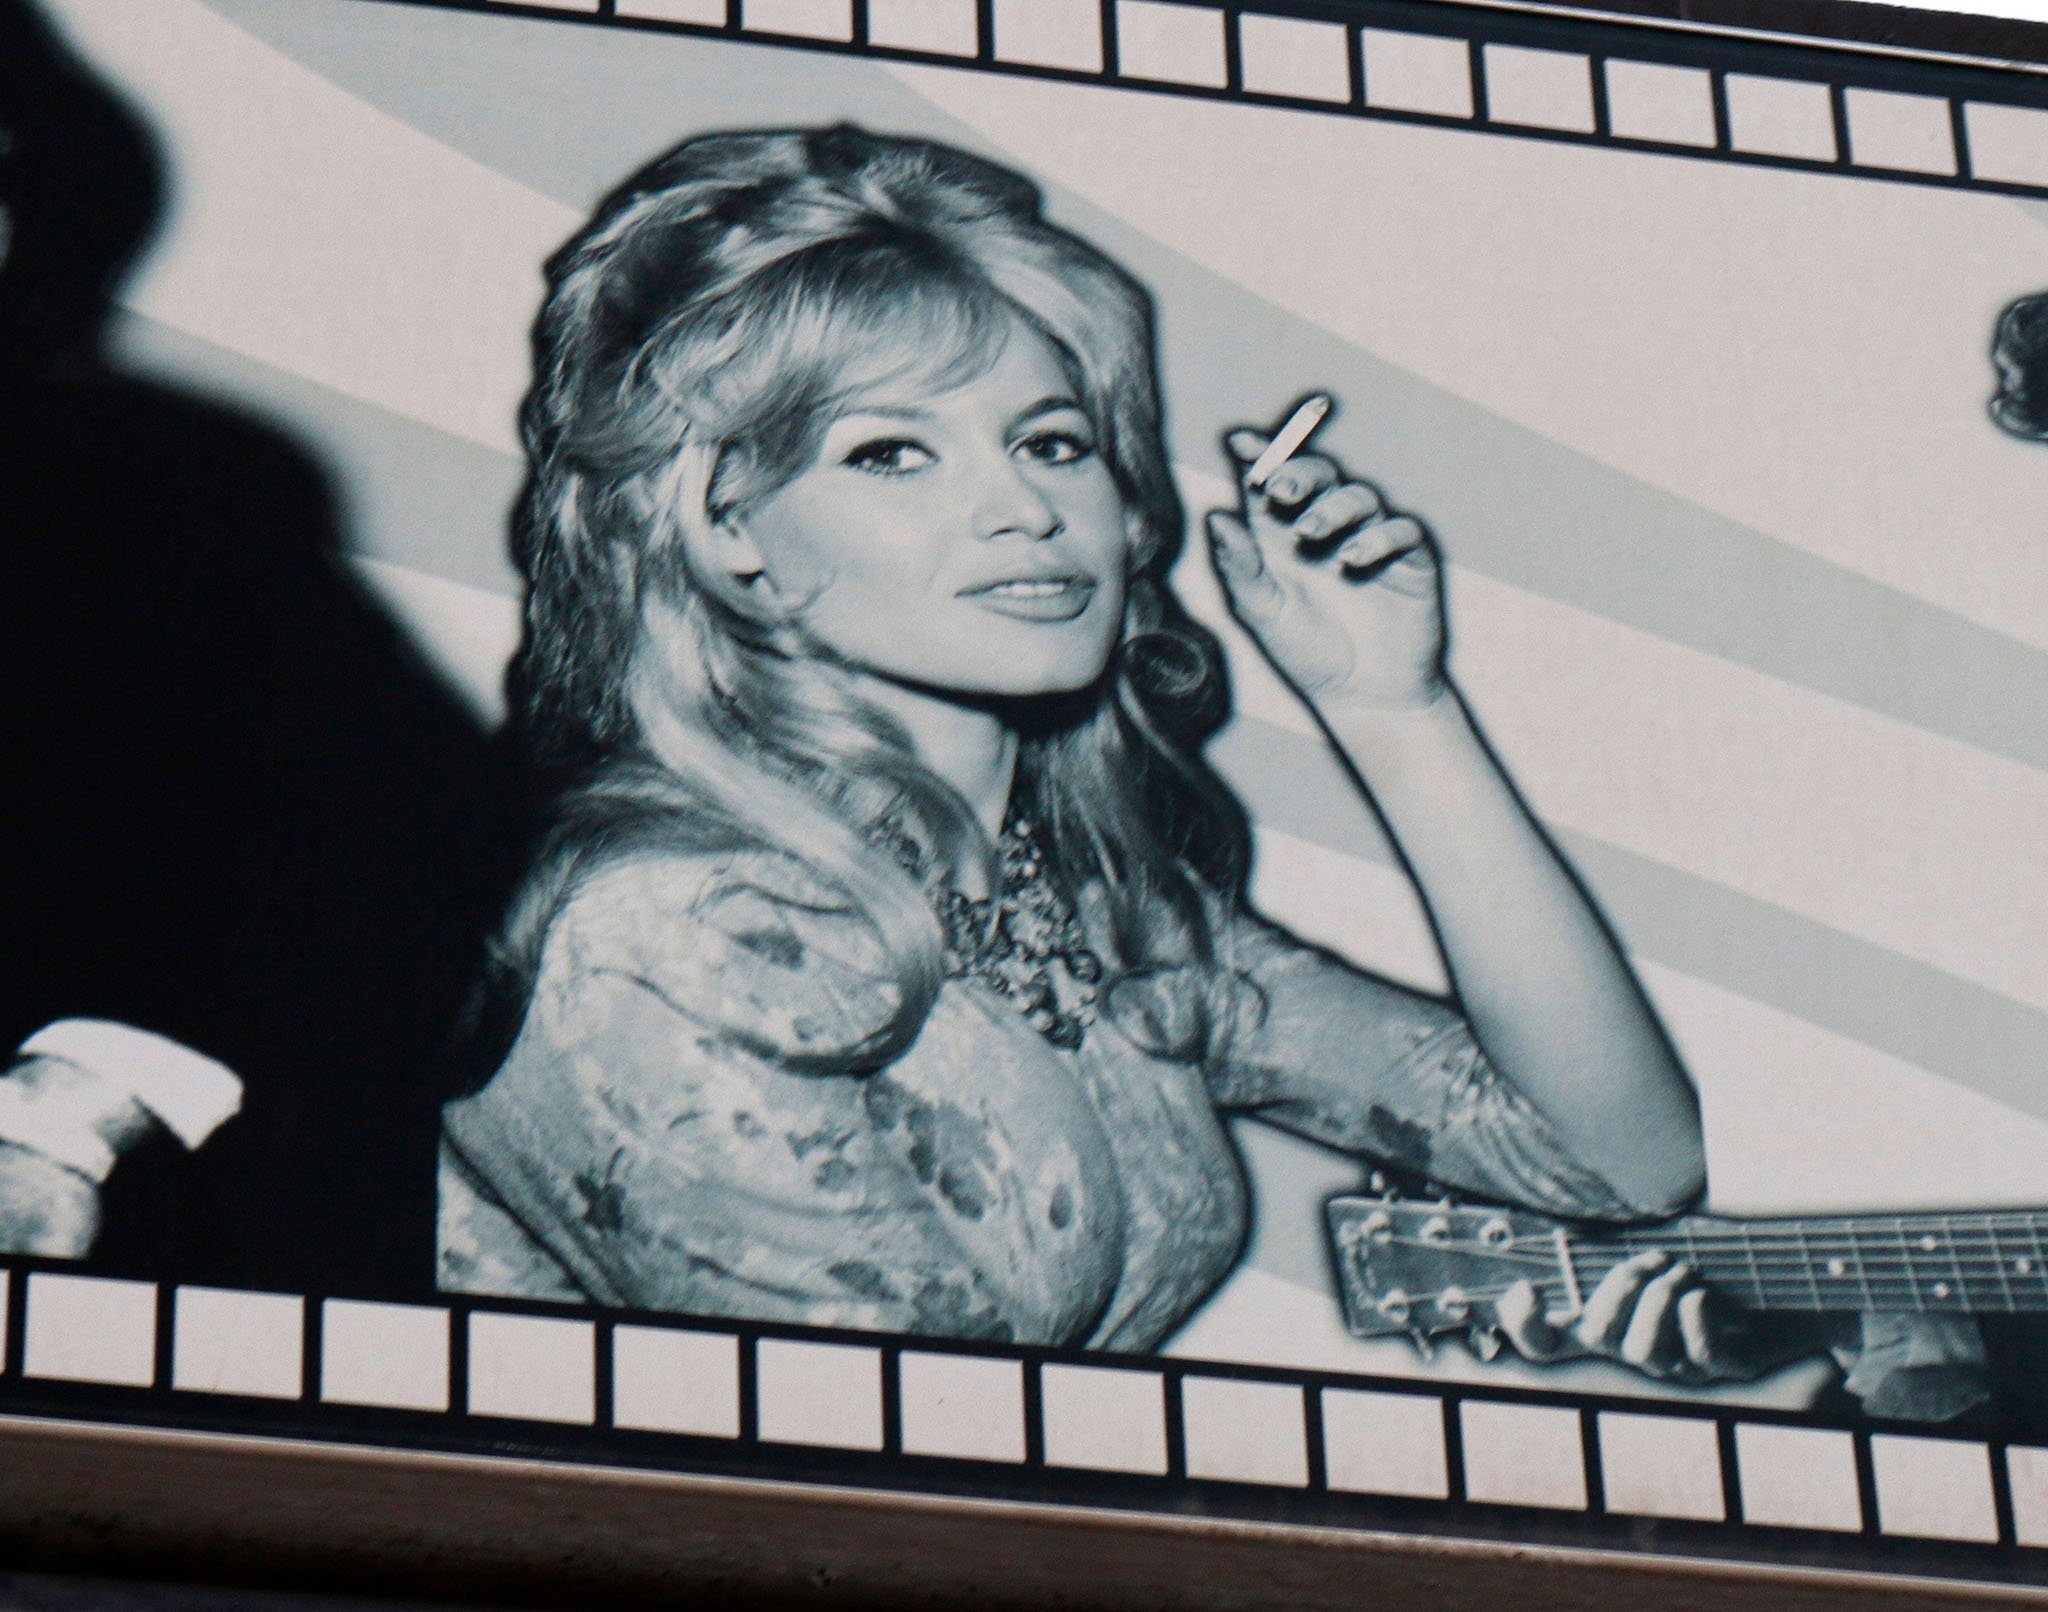 A famous model and actress, Brigitte Bardot was one of the best known sex symbols of the late '50s and '60s